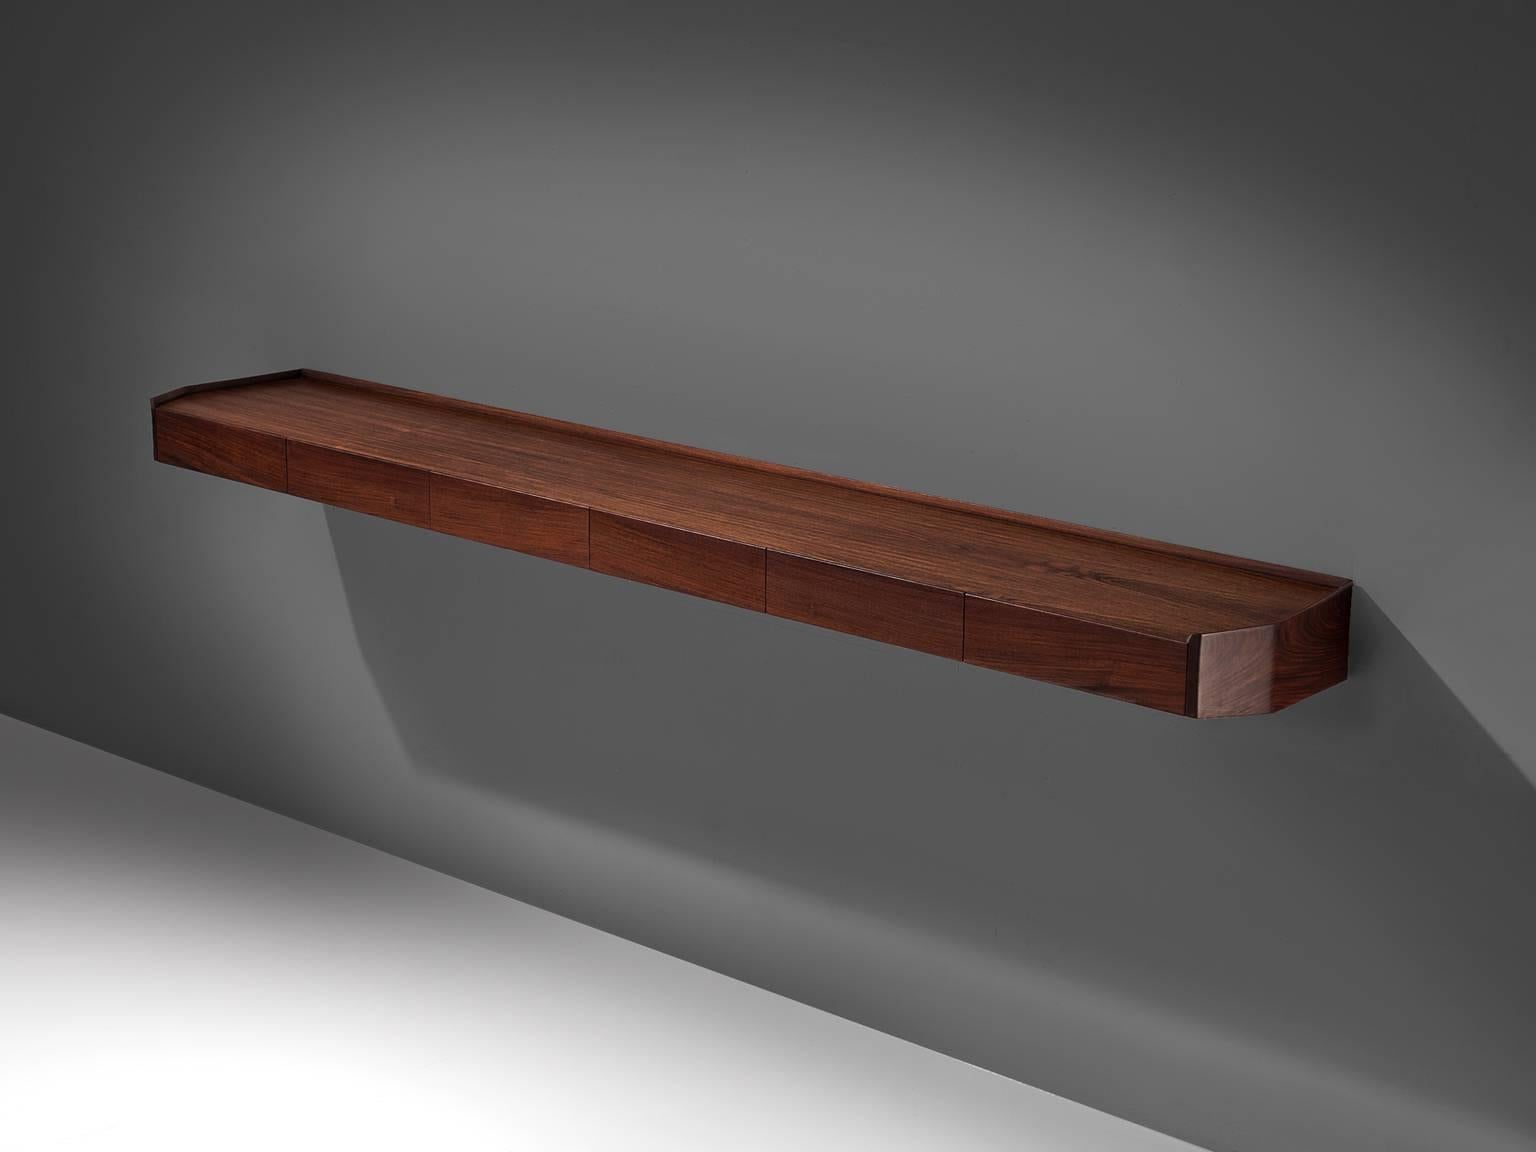 Wall shelf, rosewood, Italy, 1960s.

This rosewood piece holds six separate drawers. The piece is spectacular in the sense that it is very long and uniquely shaped. The corners are 'cut off' so to speak, by which a sculptural piece is created that